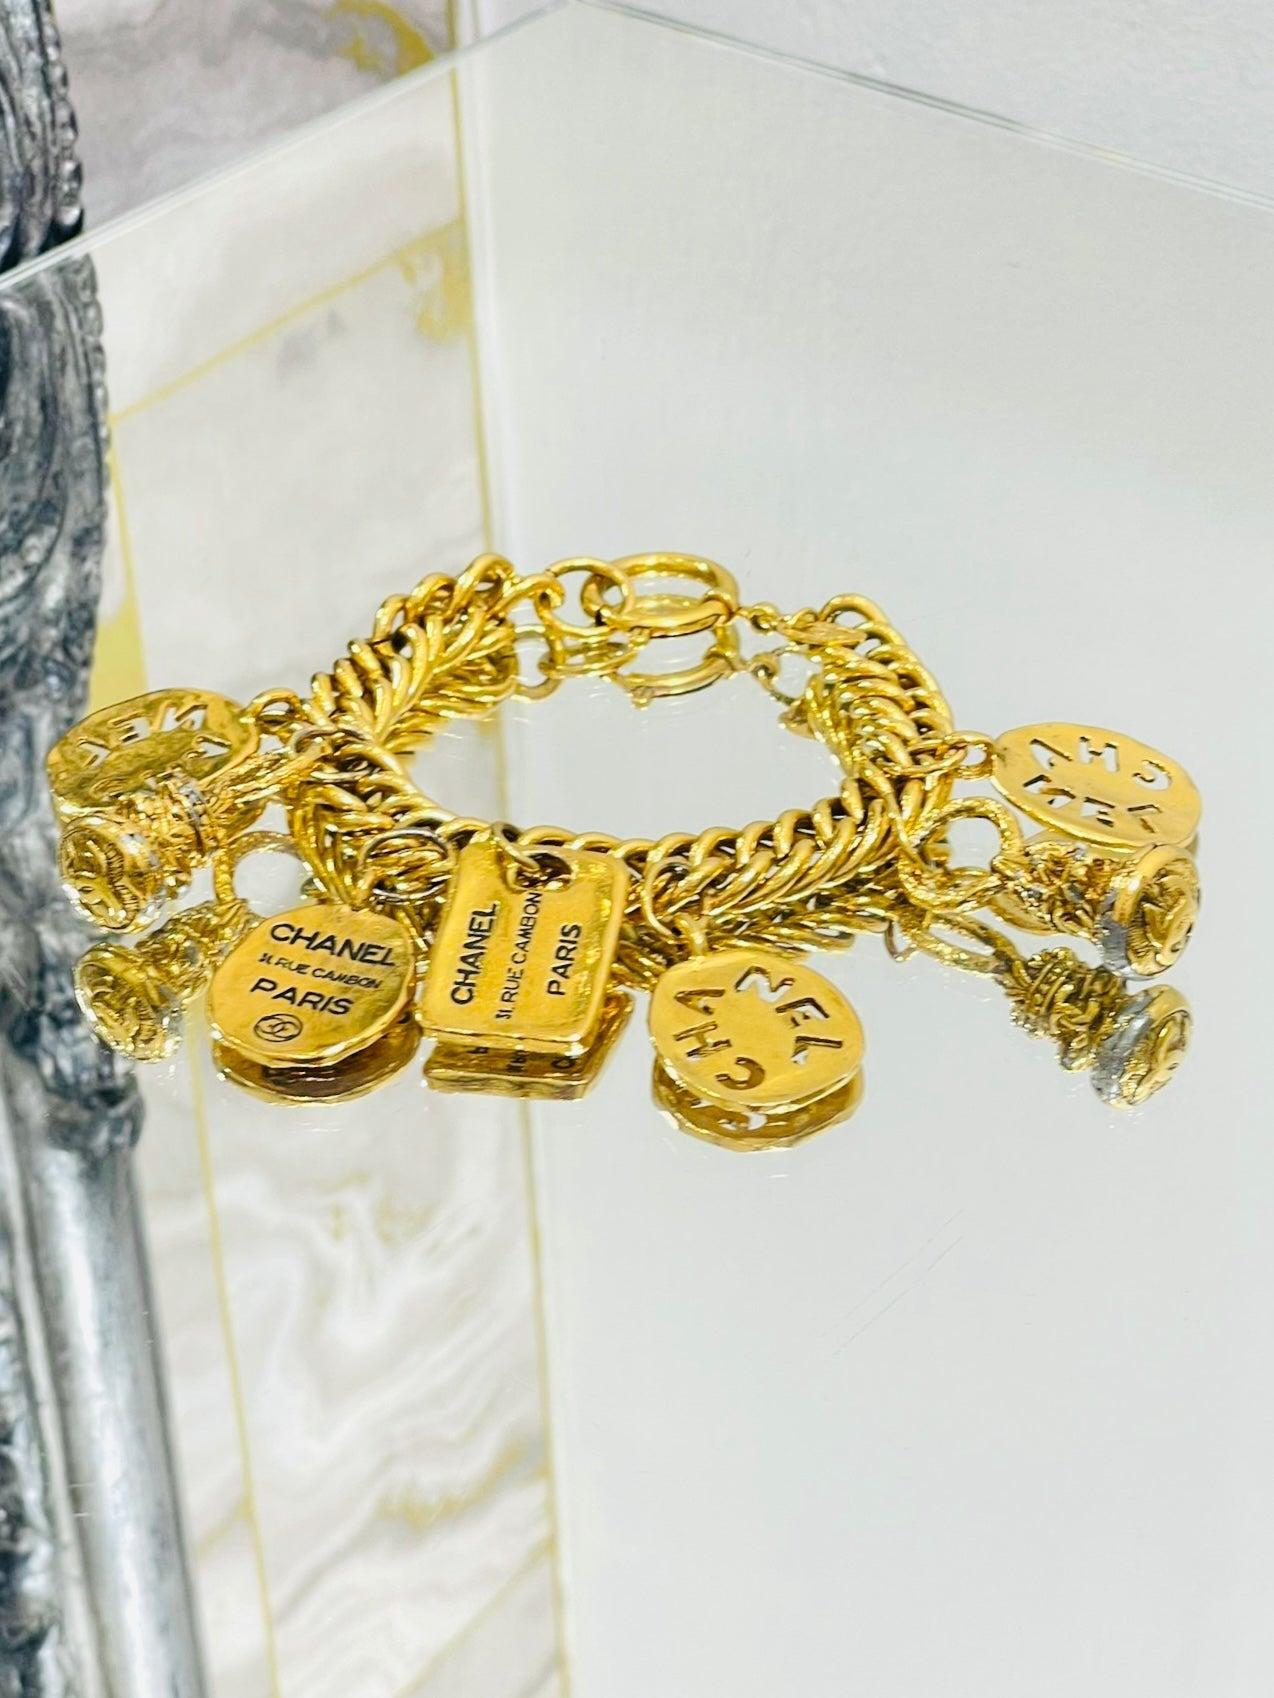 Chanel Vintage 24k Gold Plated Charm Bracelet

Large link bracelet with Fob logo charms and 'Chanel Rue' cut out plaques. From the 1980's. 

Additional information:
Size – One Size
Composition- Metal, 24k Gold Plate
Condition – Vintage - Good (Some